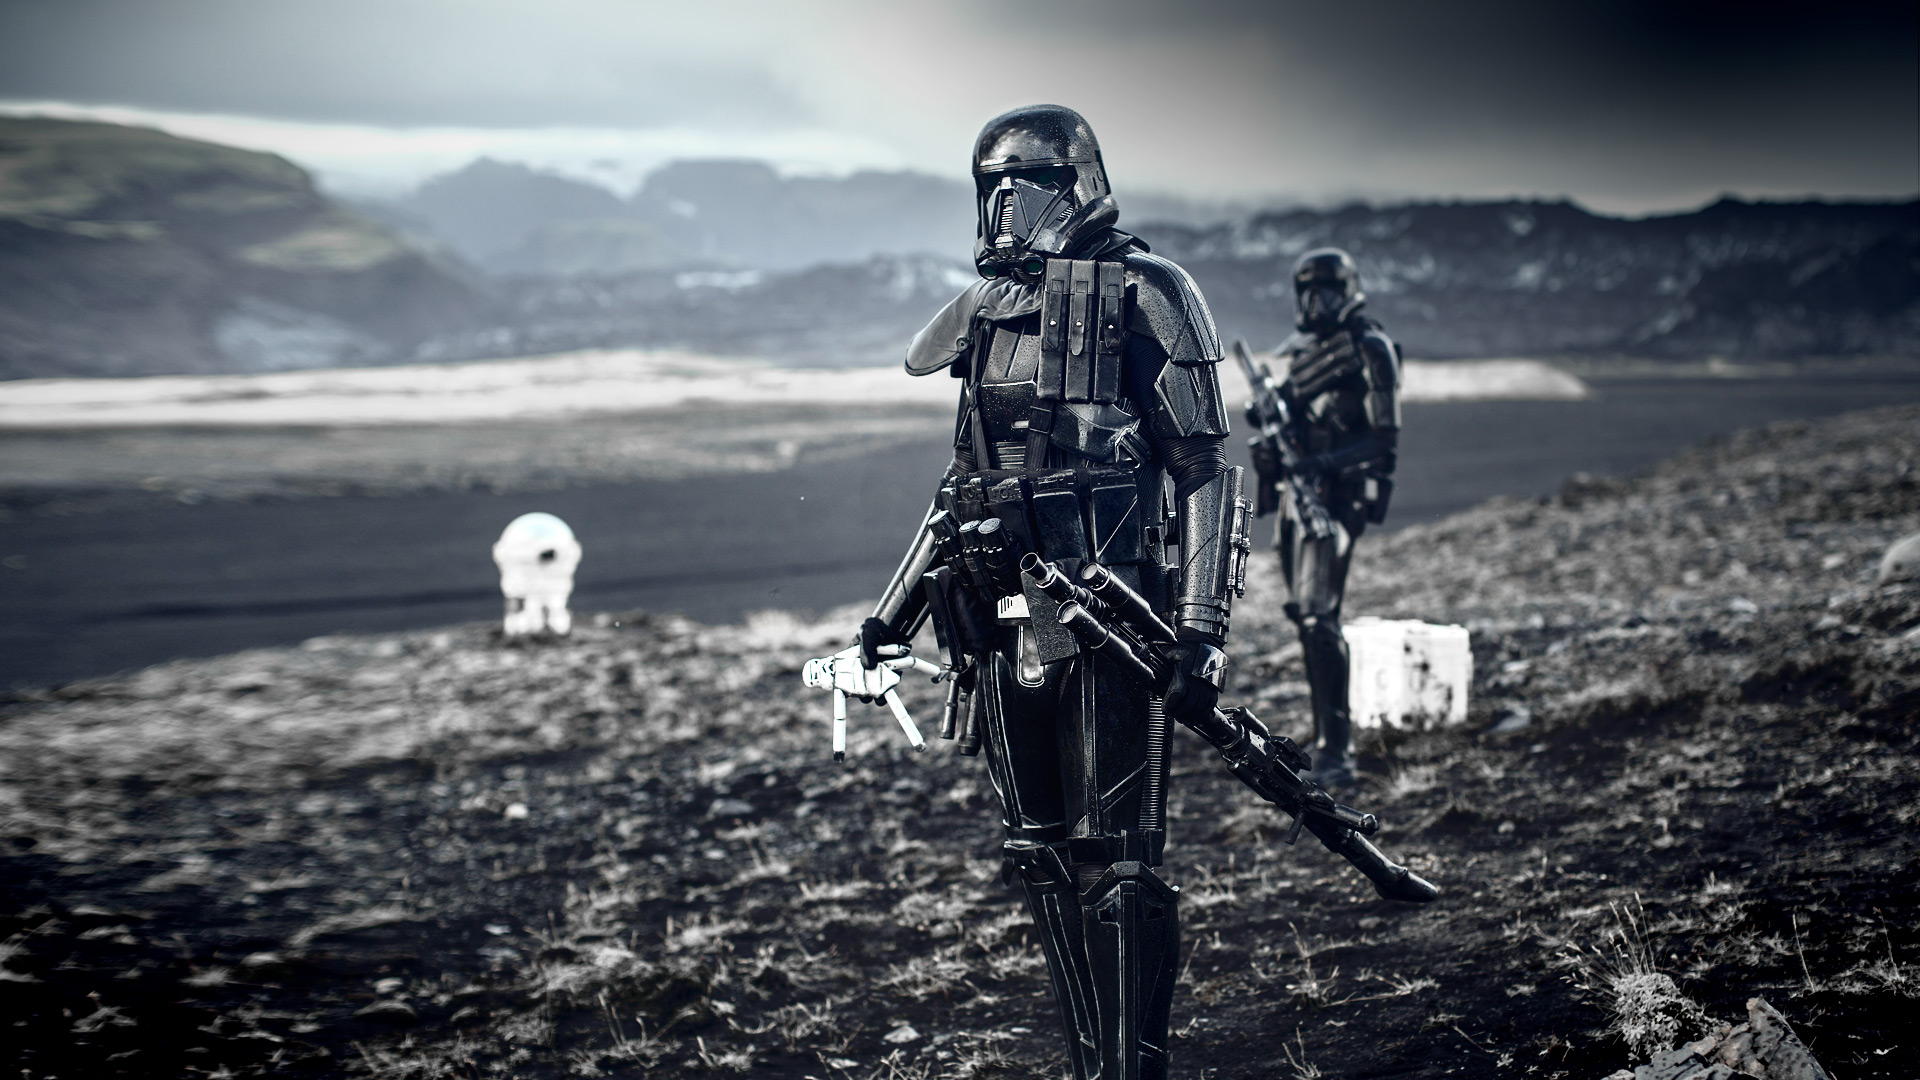 Imperial Death Trooper, Stormtrooper, Star Wars, Rogue One: A Star Wars Story Wallpaper